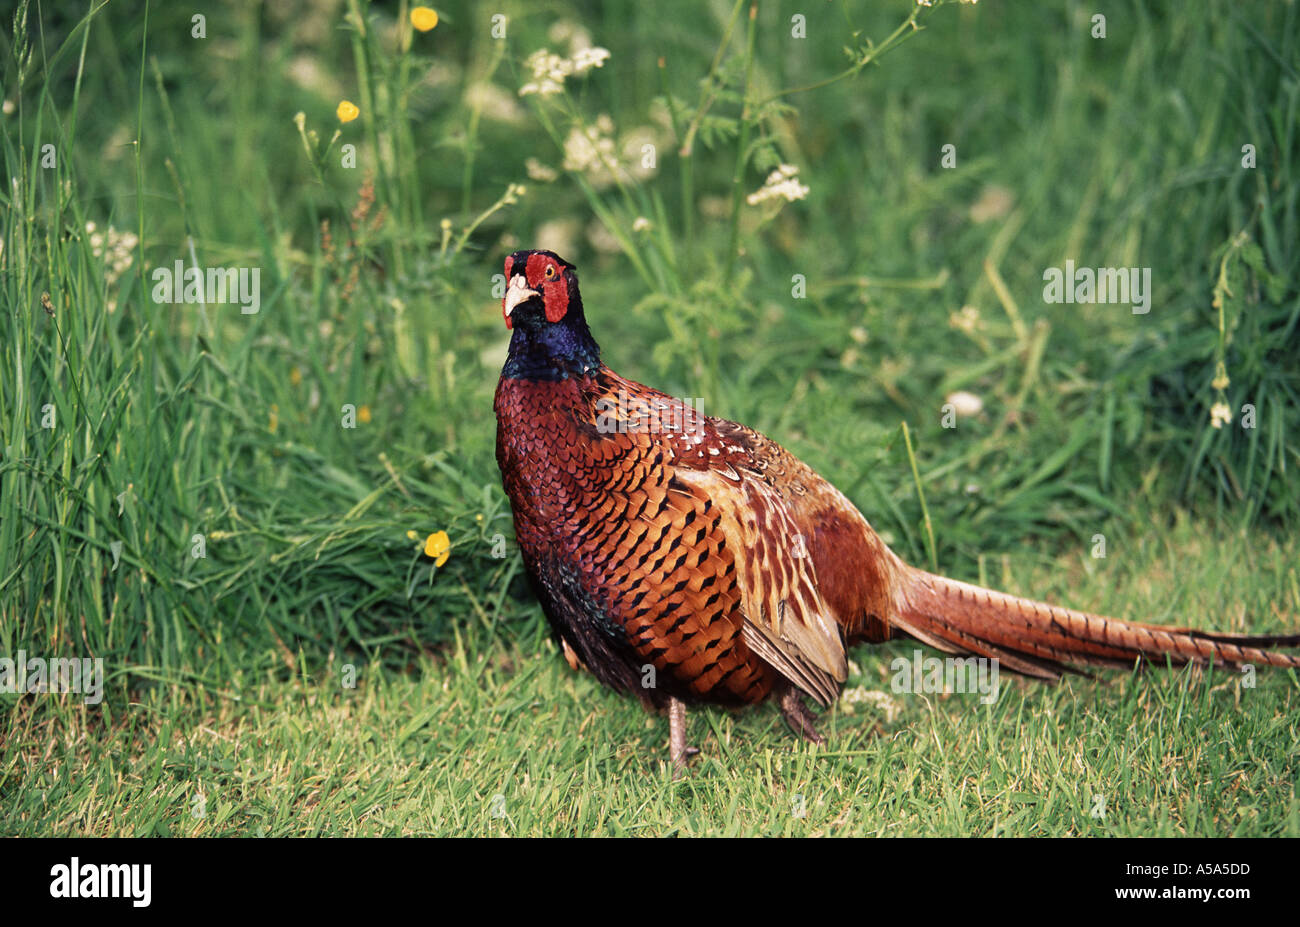 A Common Pheasant, Phasianus colchicus, in a garden in Cornwall, Great Britain. Stock Photo